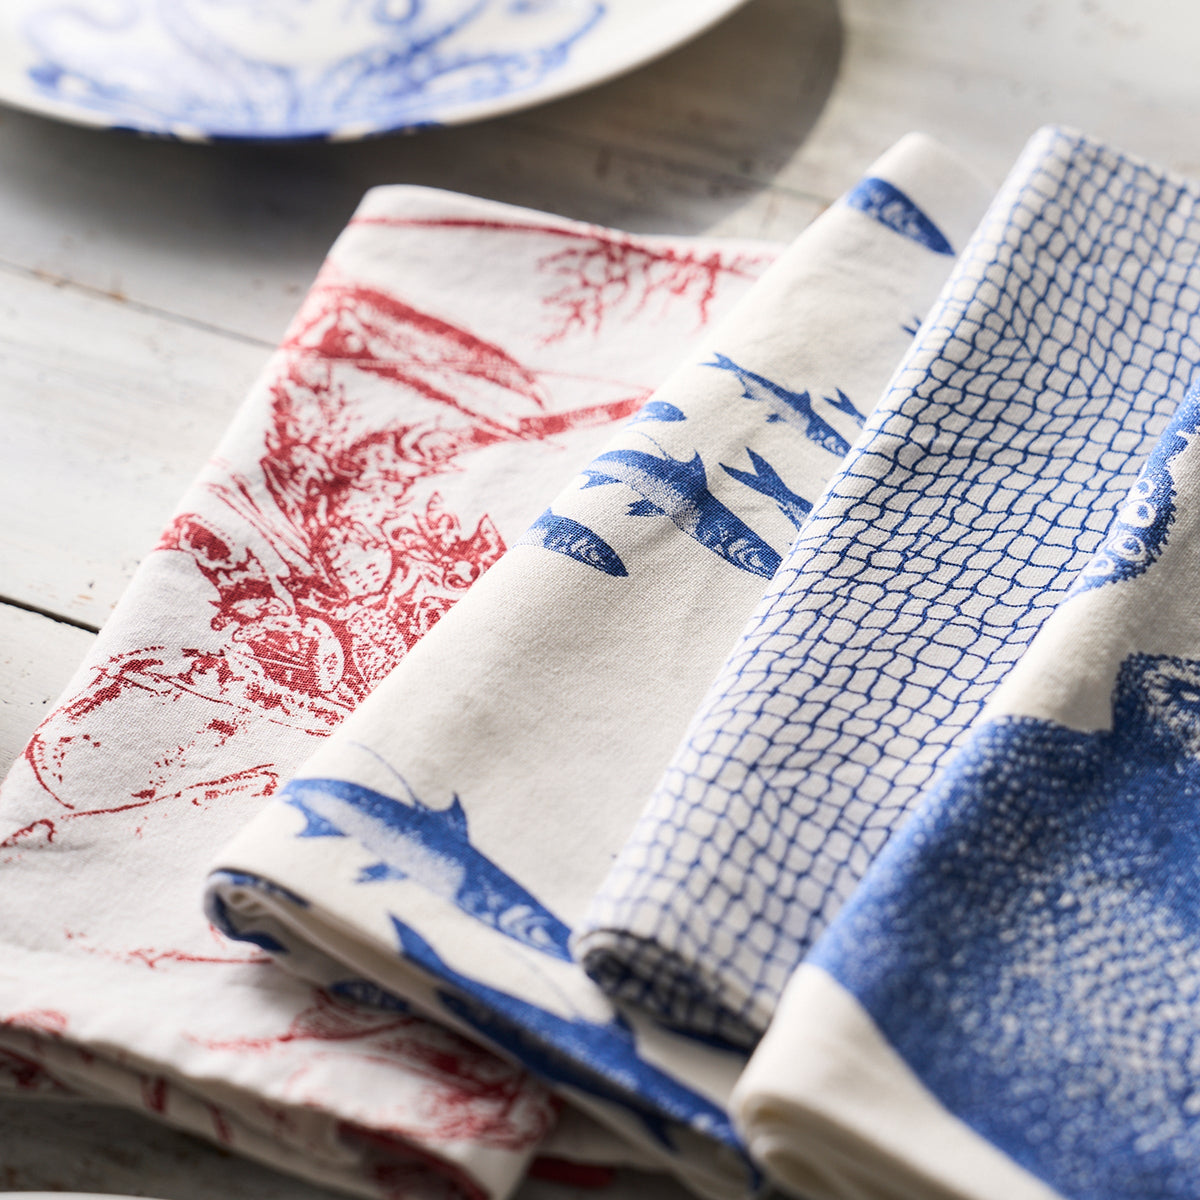 Folded napkins from our School of Fish Dinner Napkins, Set of 4 from Caskata with intricate red and blue patterns on a rustic wooden table.